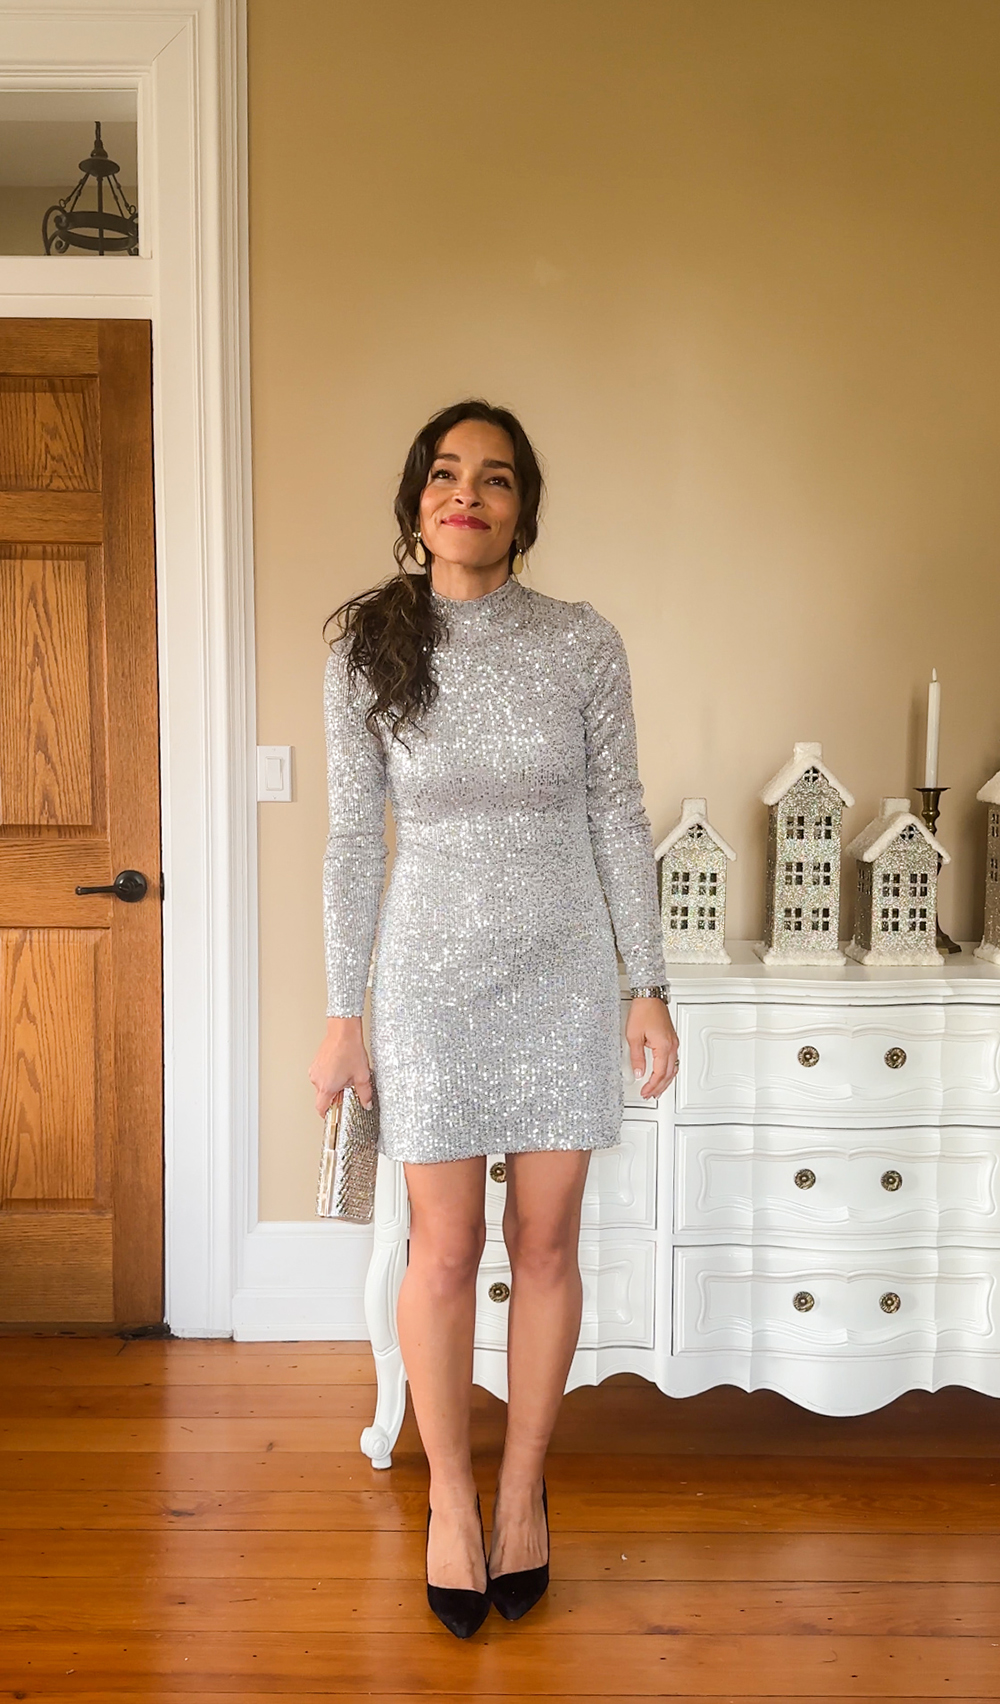 sequin dress - NYE outfit ideas